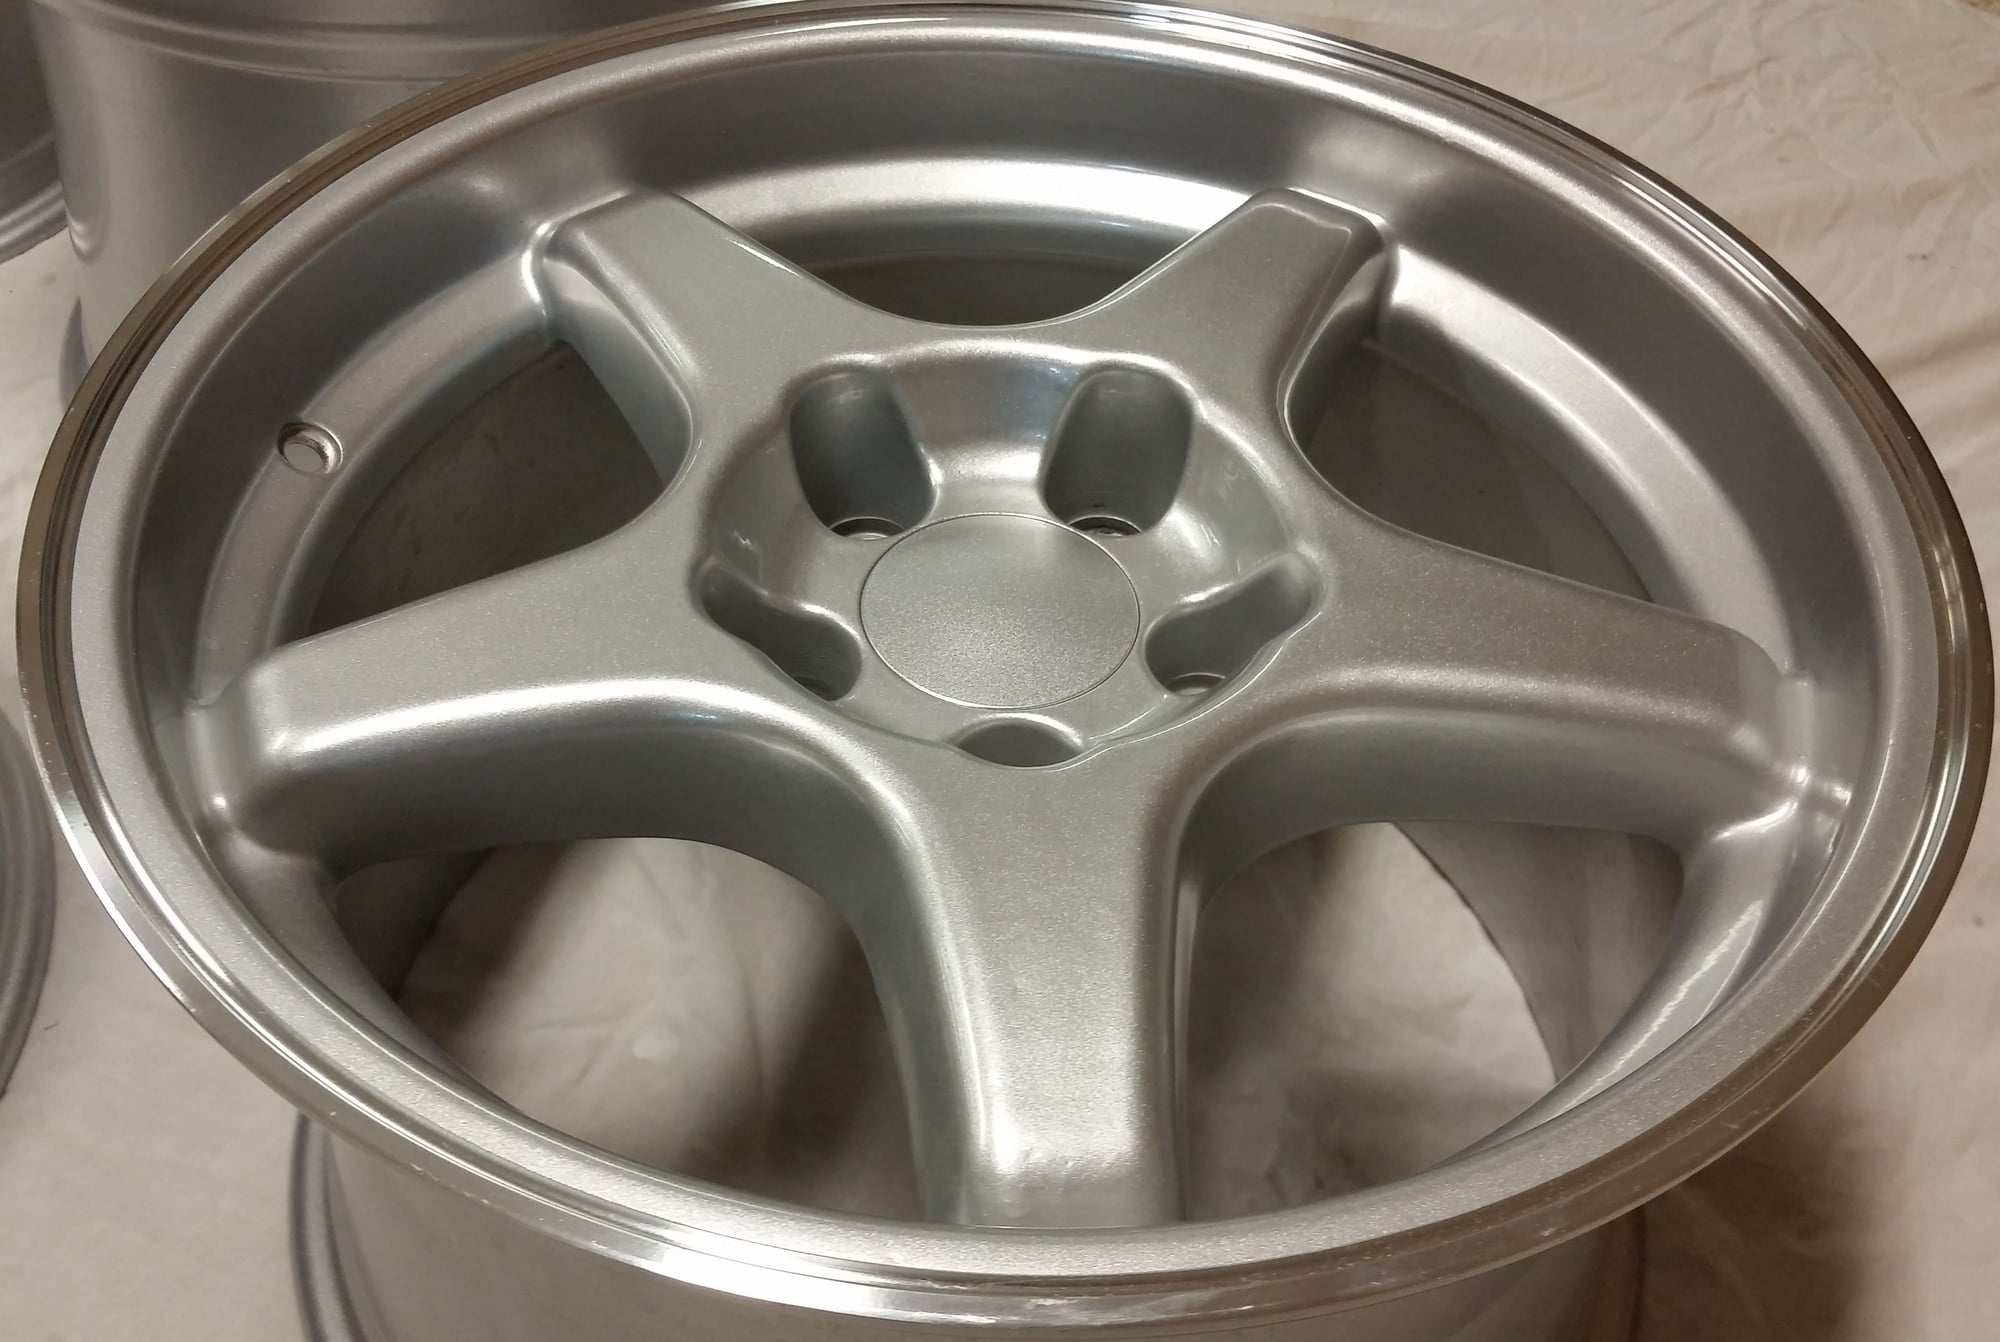 Wheels and Tires/Axles - For Sale: 4 ZR1 replica Wheels, 17”x11”, Offset: 50mm, $100 per pair, $190 for all 4 - Used - 0  All Models - Fort Wayne, IN 46845, United States